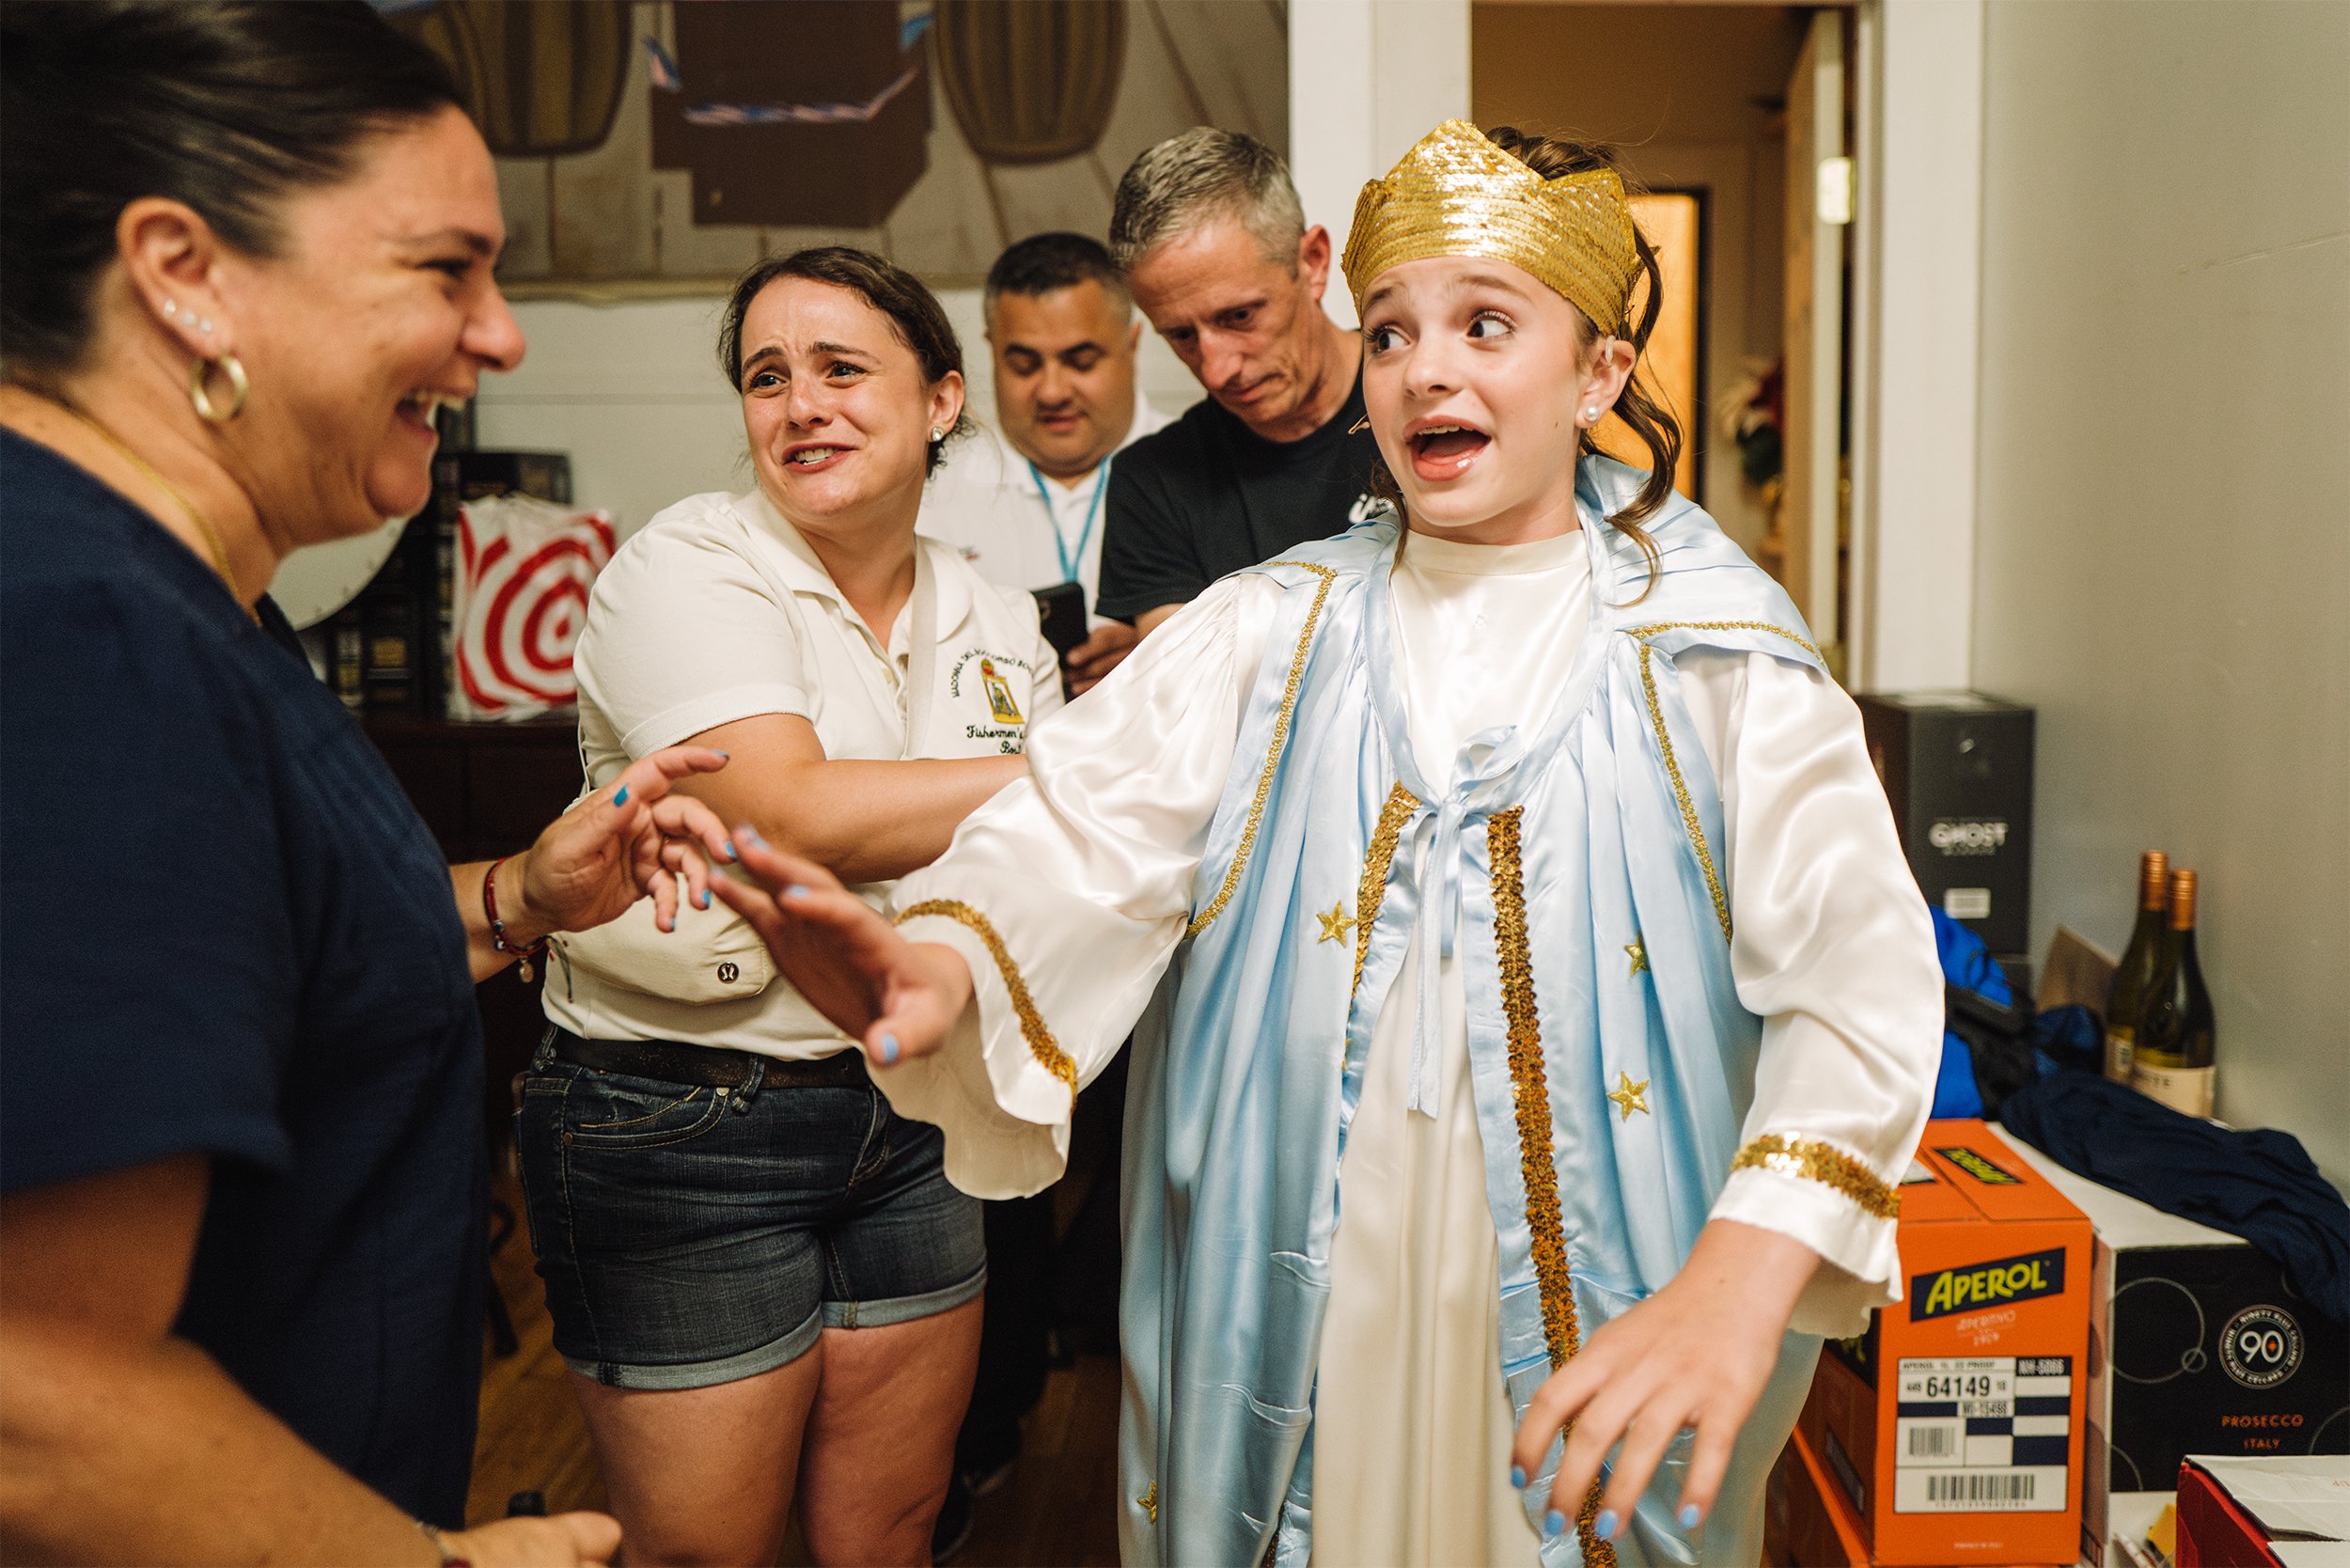  Gianna Puccio, 12, is teased by her mom, Lina Puccio (left)  while preparing to fly as the angel for the second year in a row at the Feast of the Fisherman in the North End of Boston, Mass. on Aug. 20, 2023.  